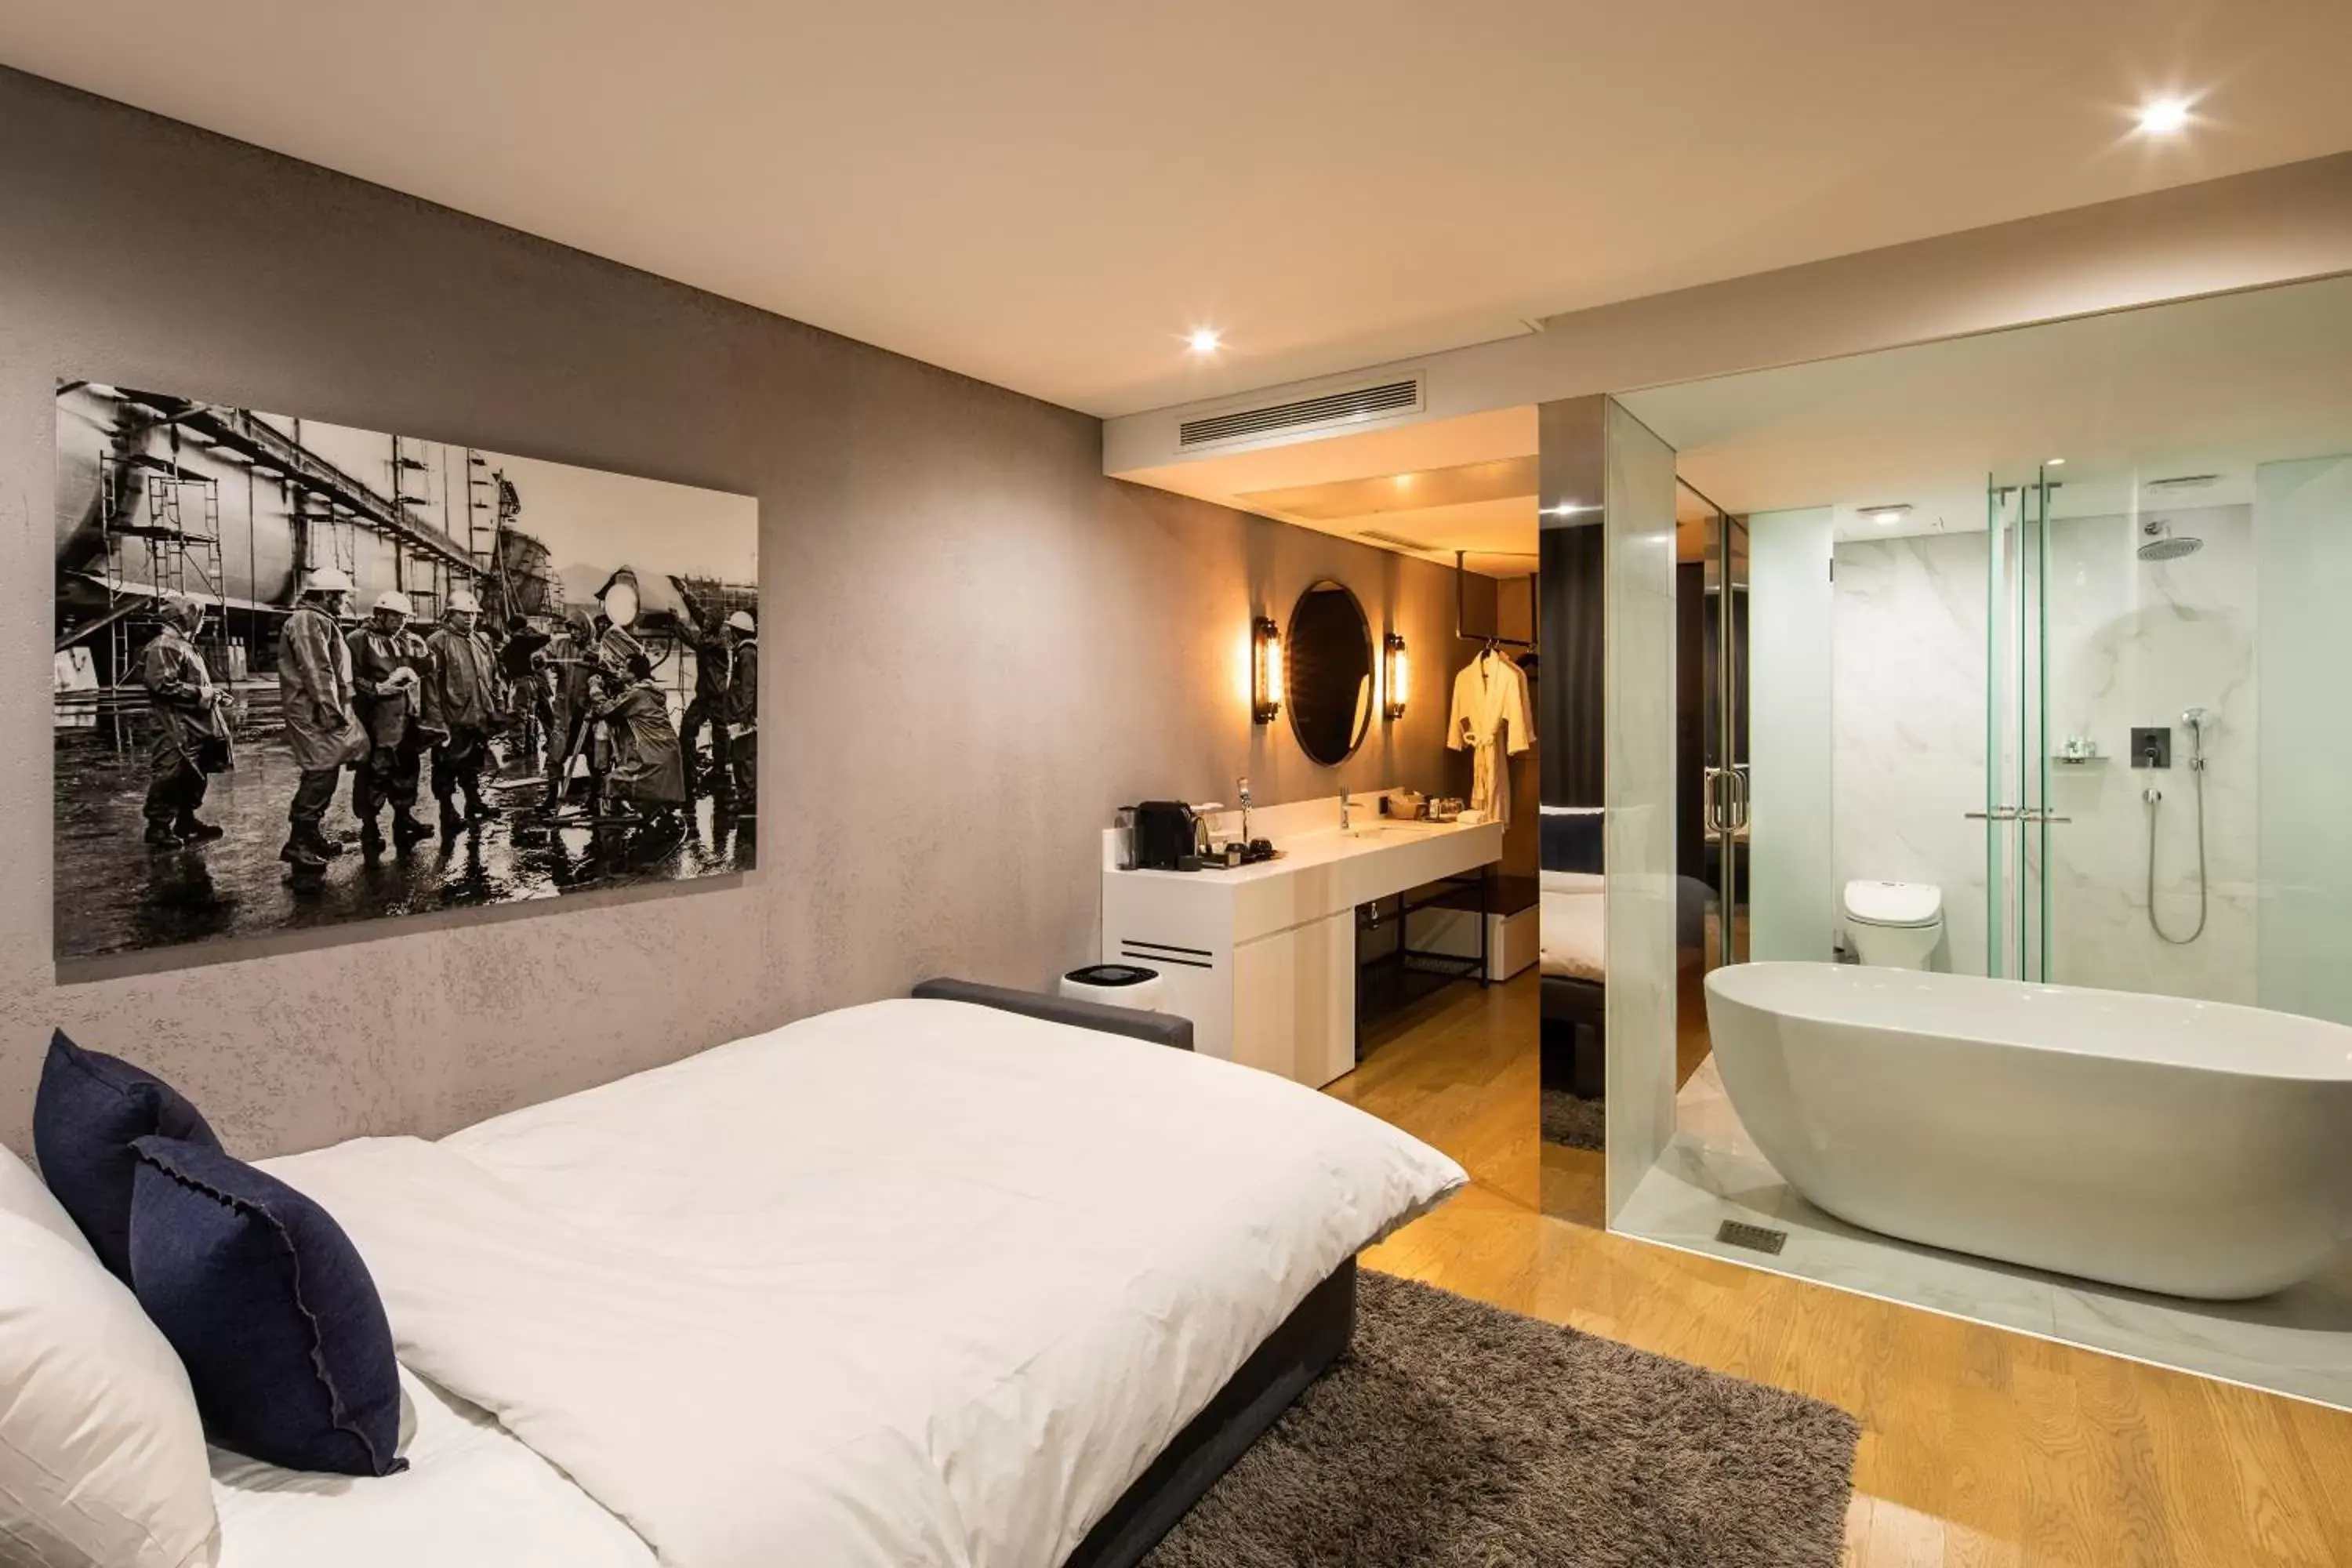 Area and facilities in Hotel28 Myeongdong